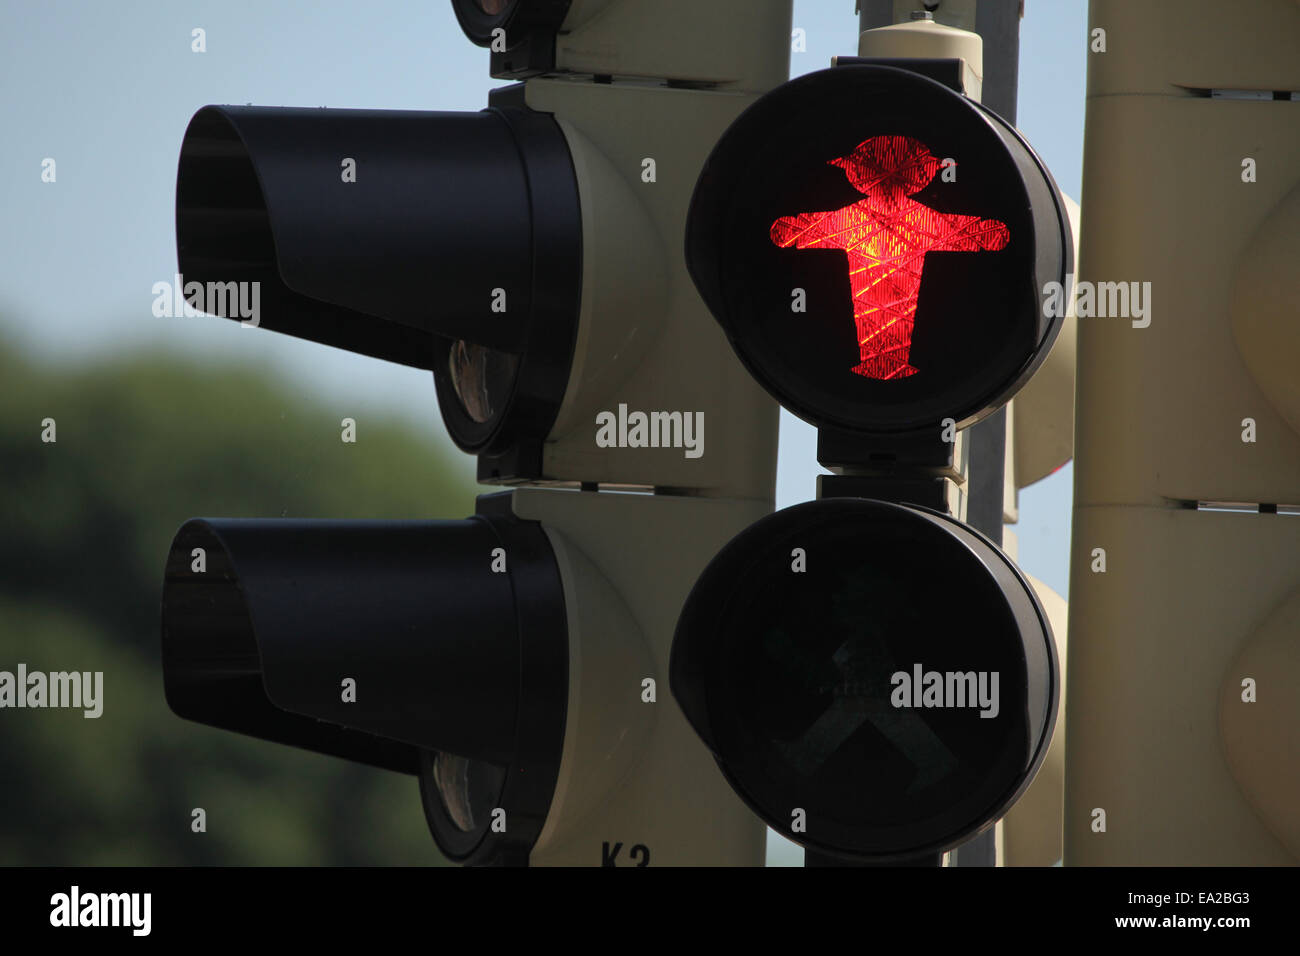 GDR era pedestrian signal little red man at the traffic lights in Dresden, Saxony, Germany. Stock Photo